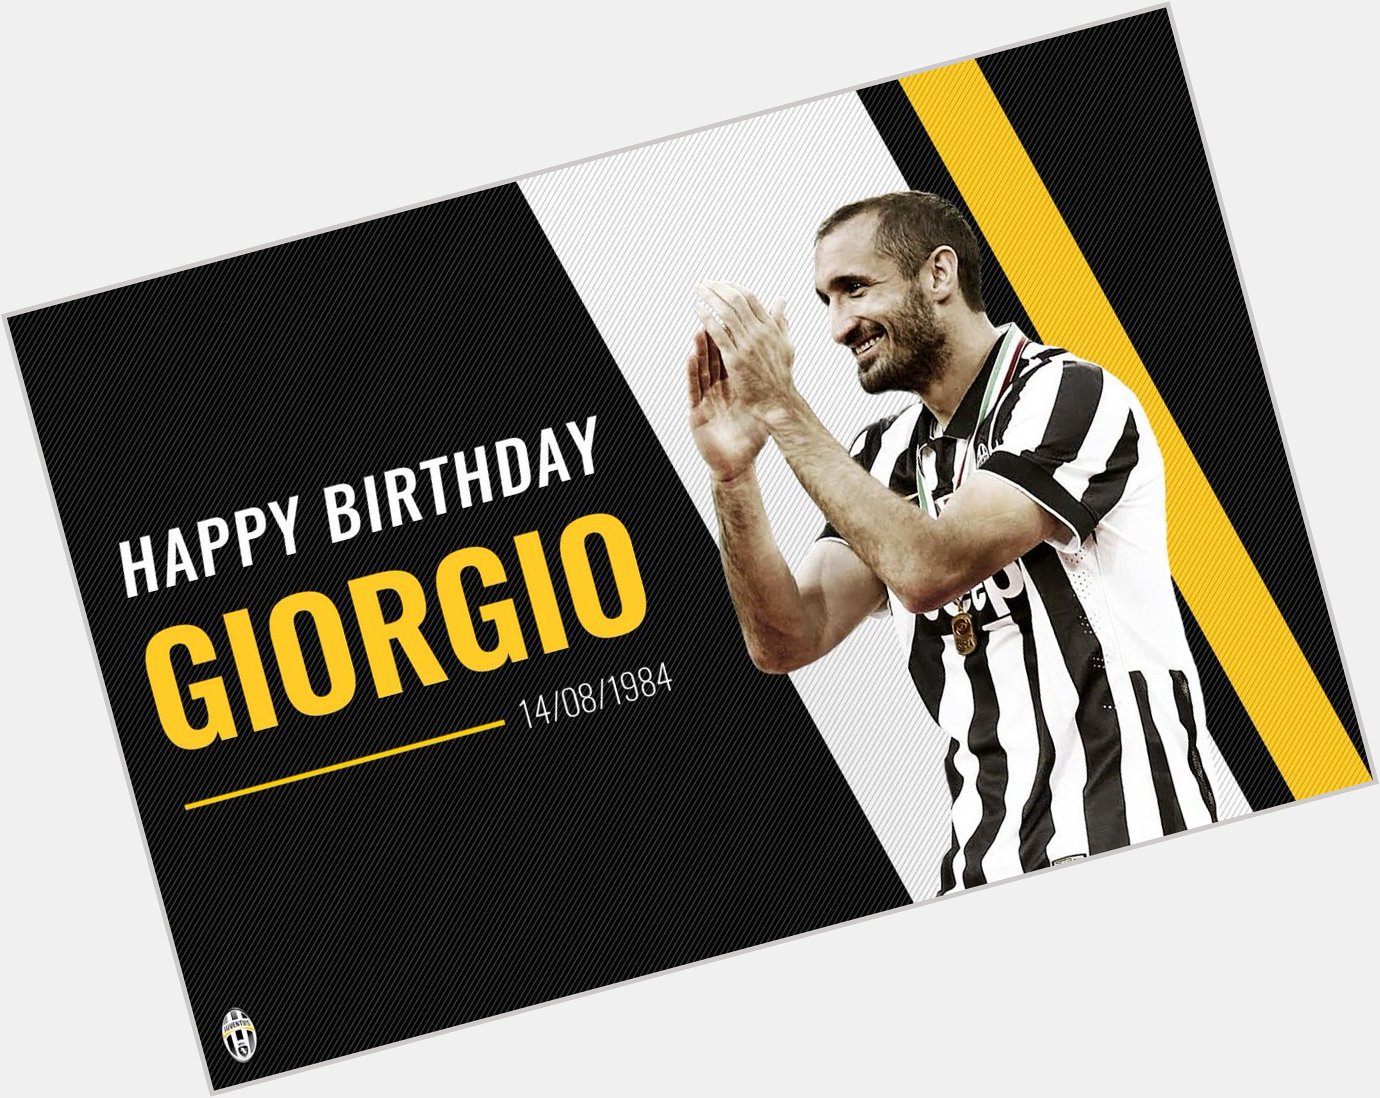 Want a great love story? There s none better than this one. Happy birthday, Giorgio 